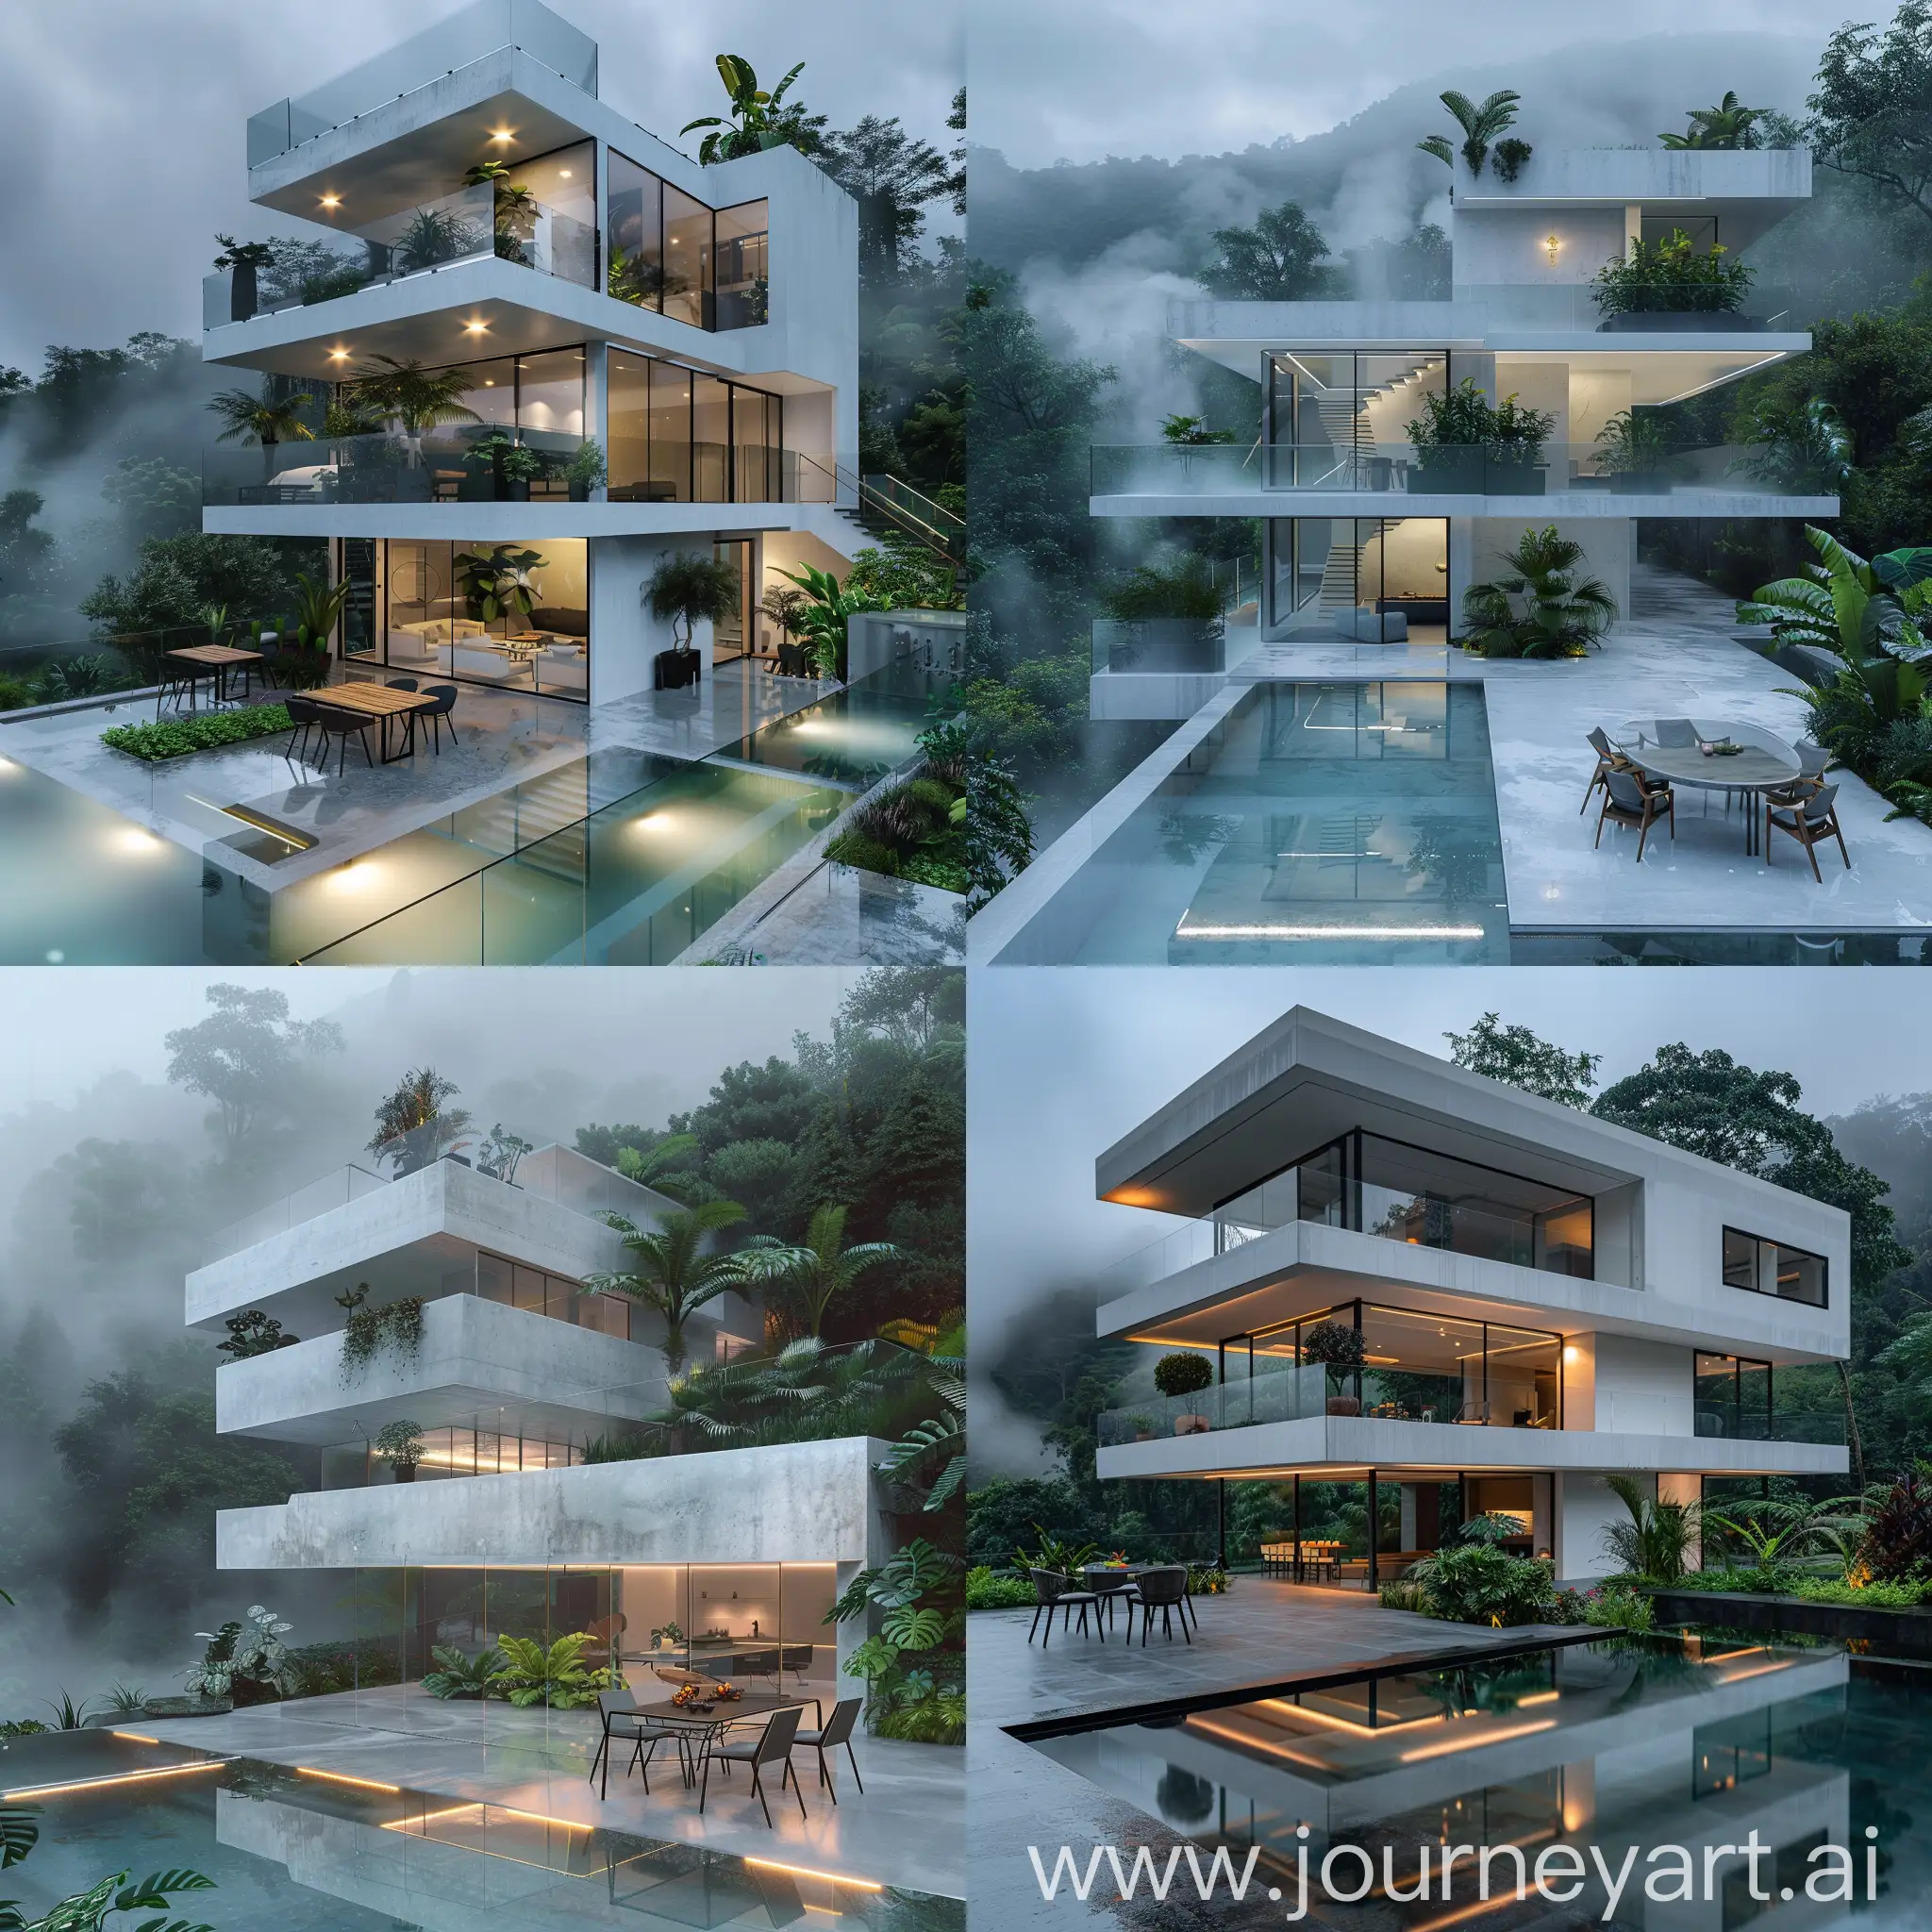 Modern three-story white concrete villa with glass infinity pool
 soft lighting, landscaping, table and chairs and plants,
 In a tropical green forest with misty cloudy weather, real photo

